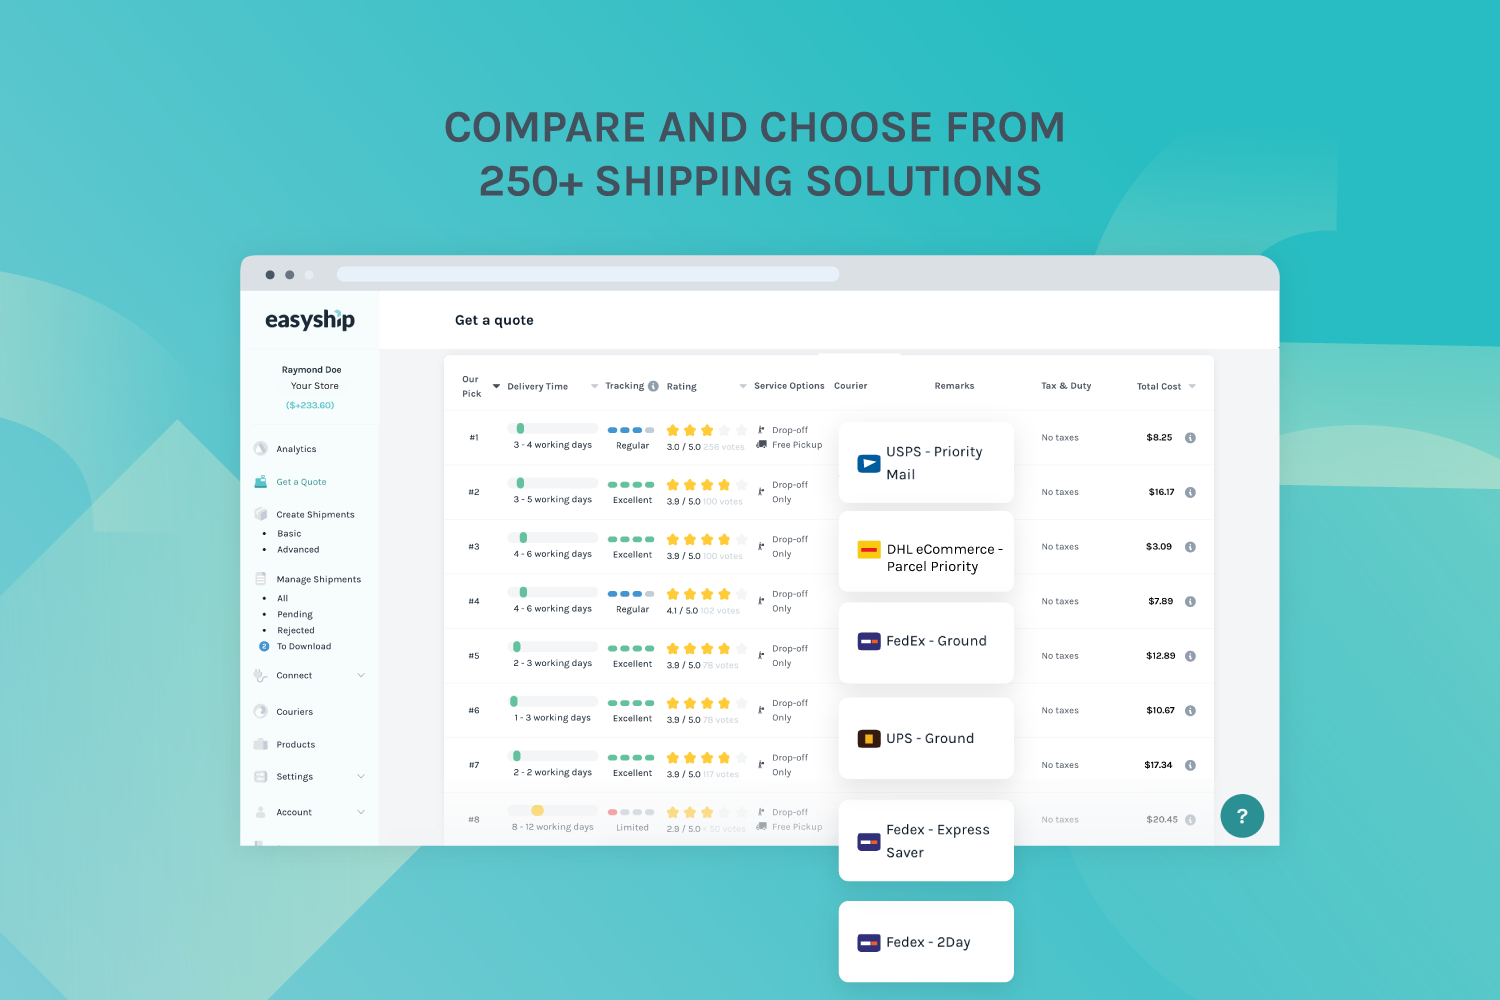 Compare and choose from 250+ shipping solutions